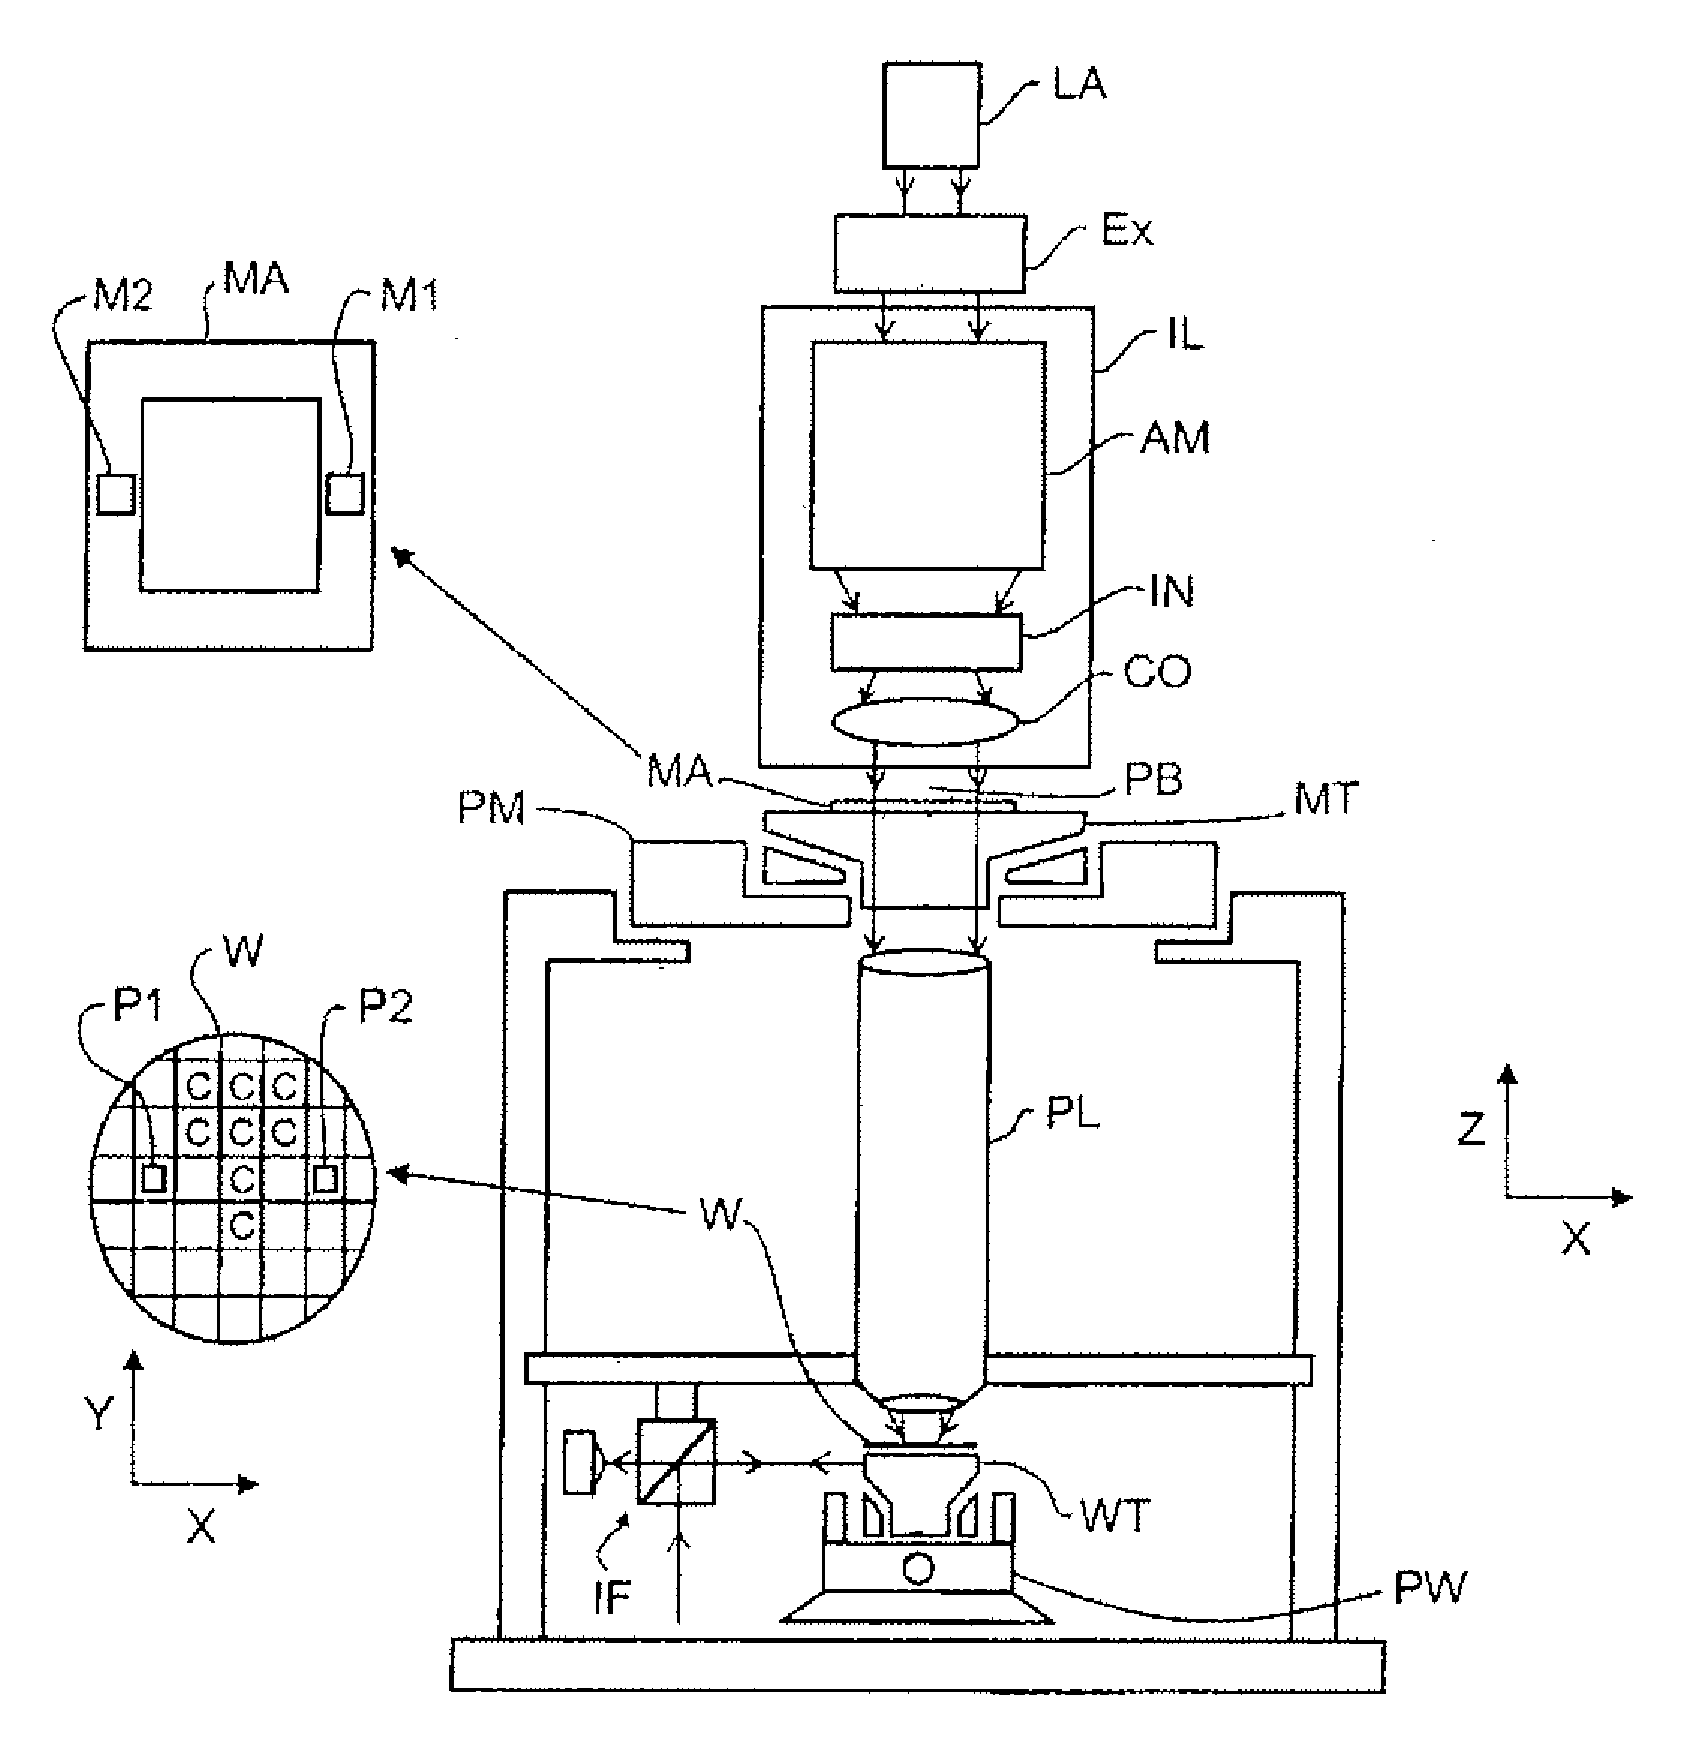 Lithographic processing method, and device manufactured thereby